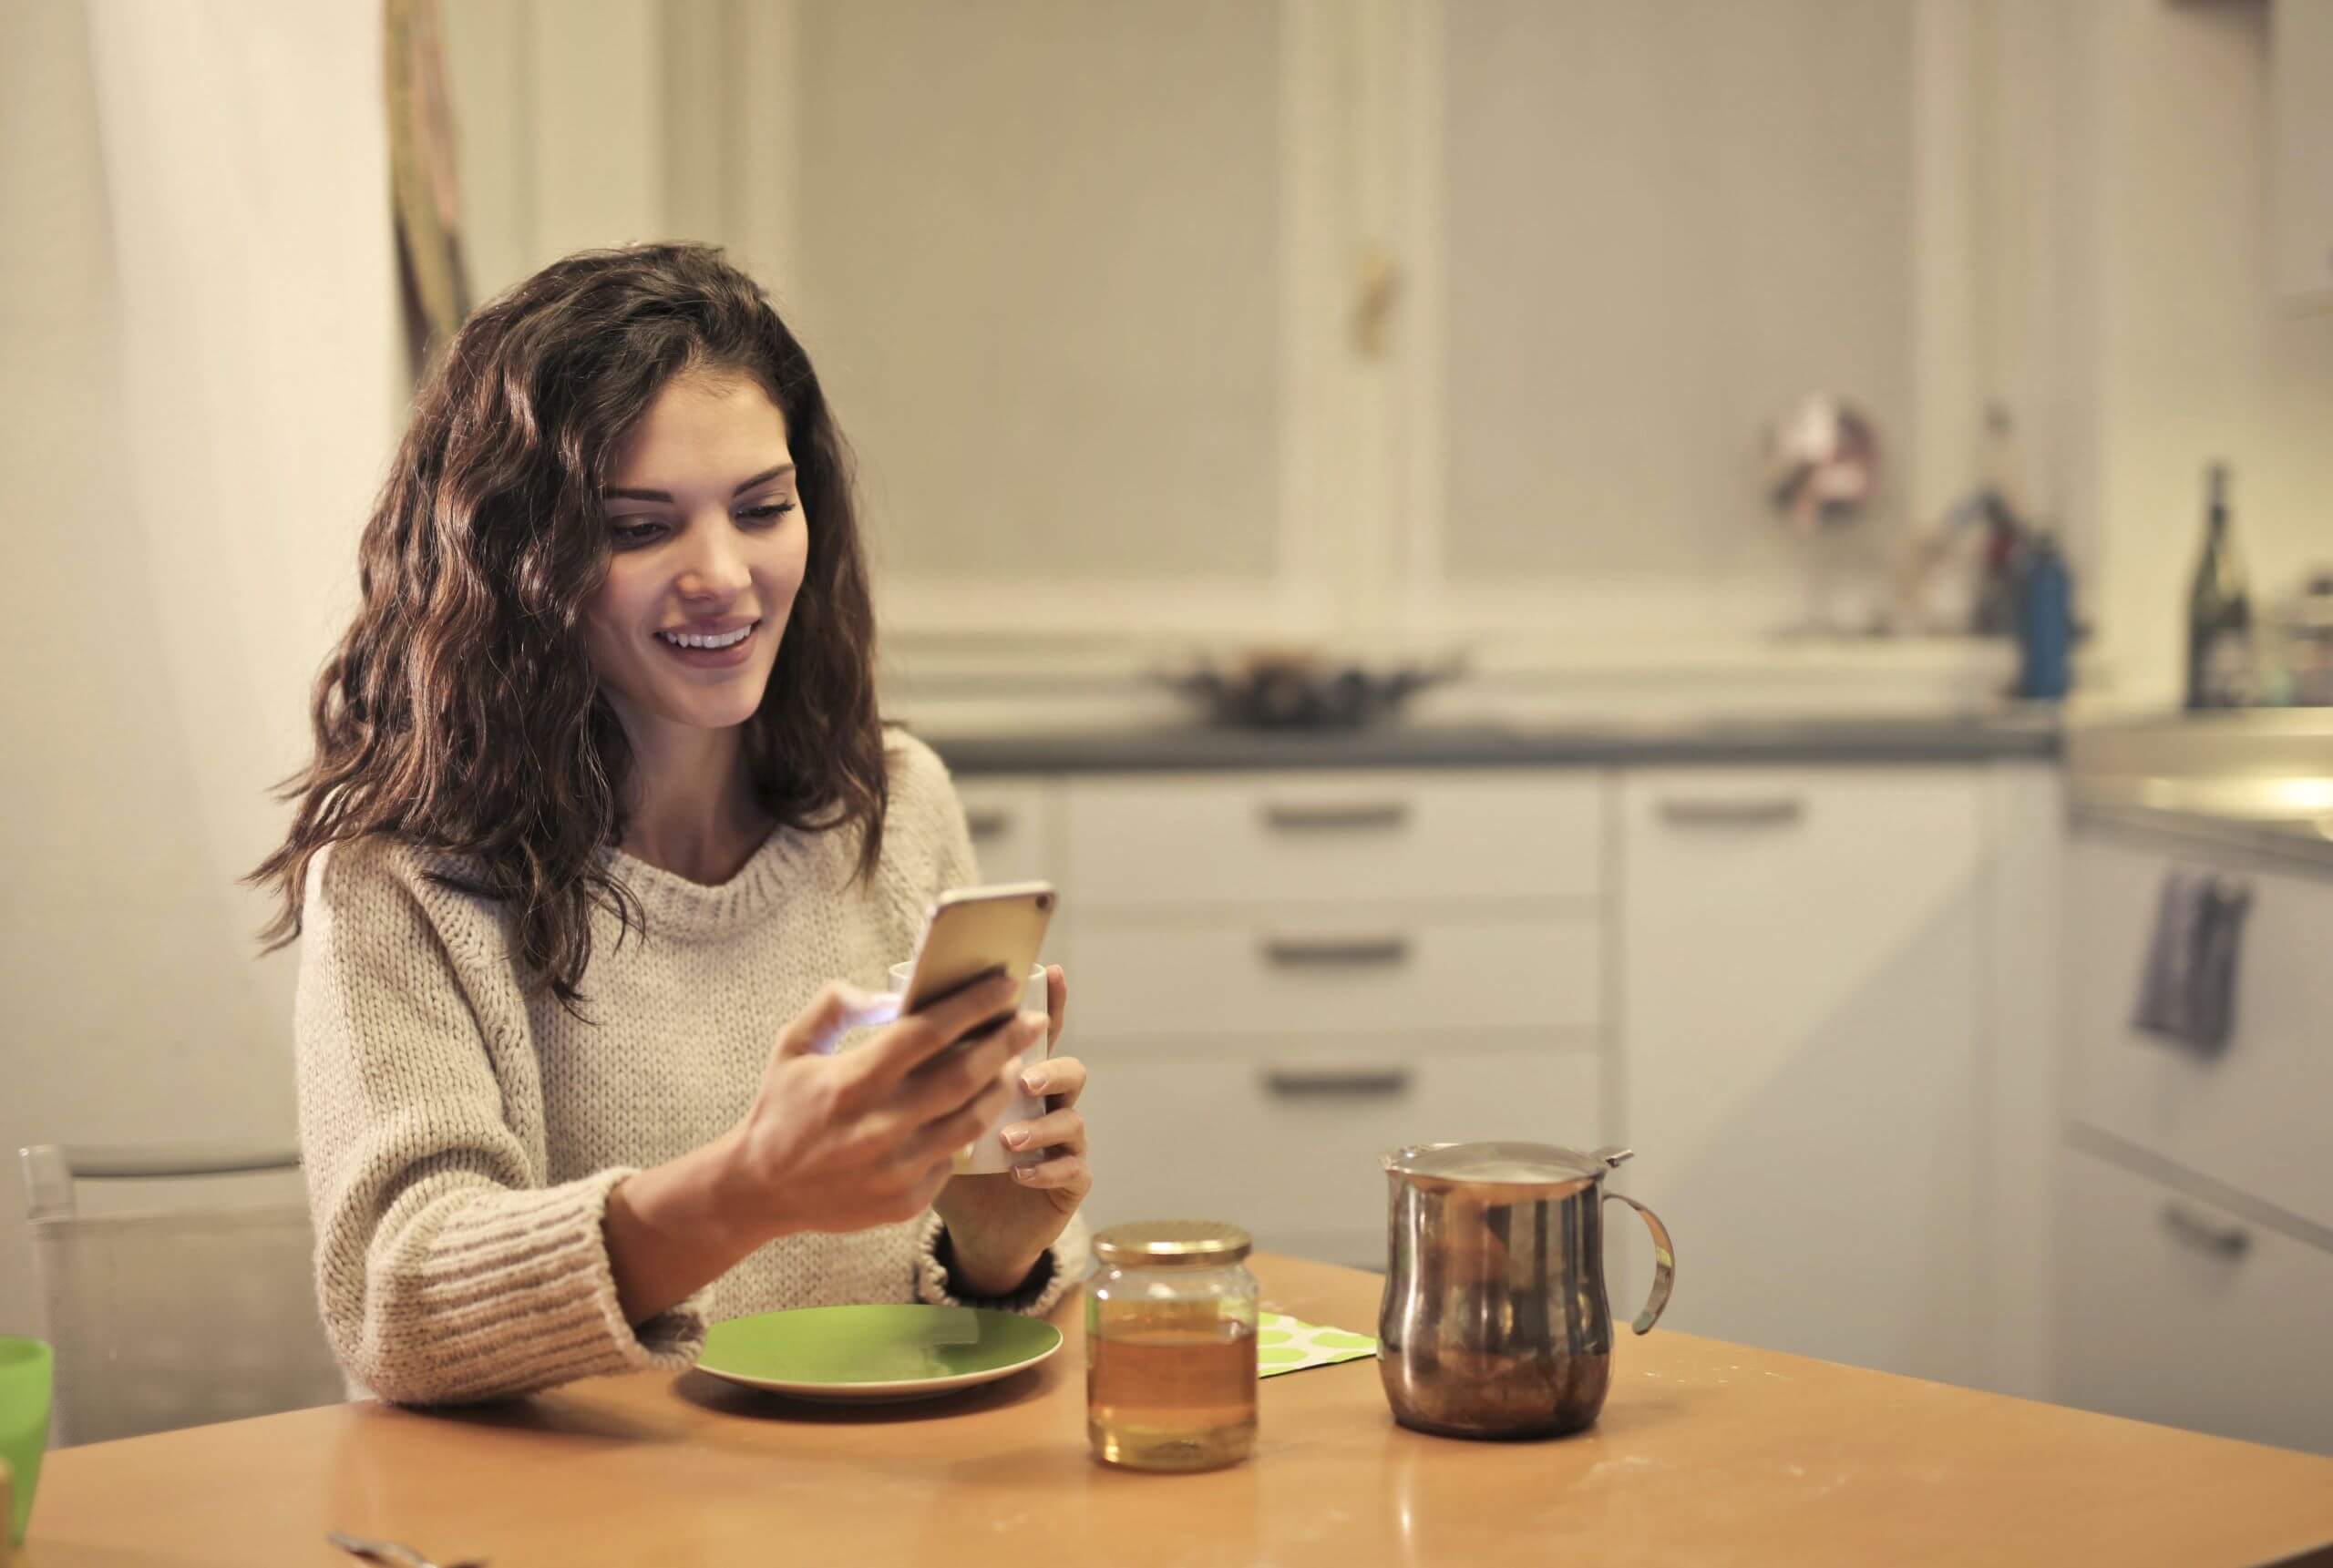 Young woman sitting at kitchen table with her phone and a cup of tea